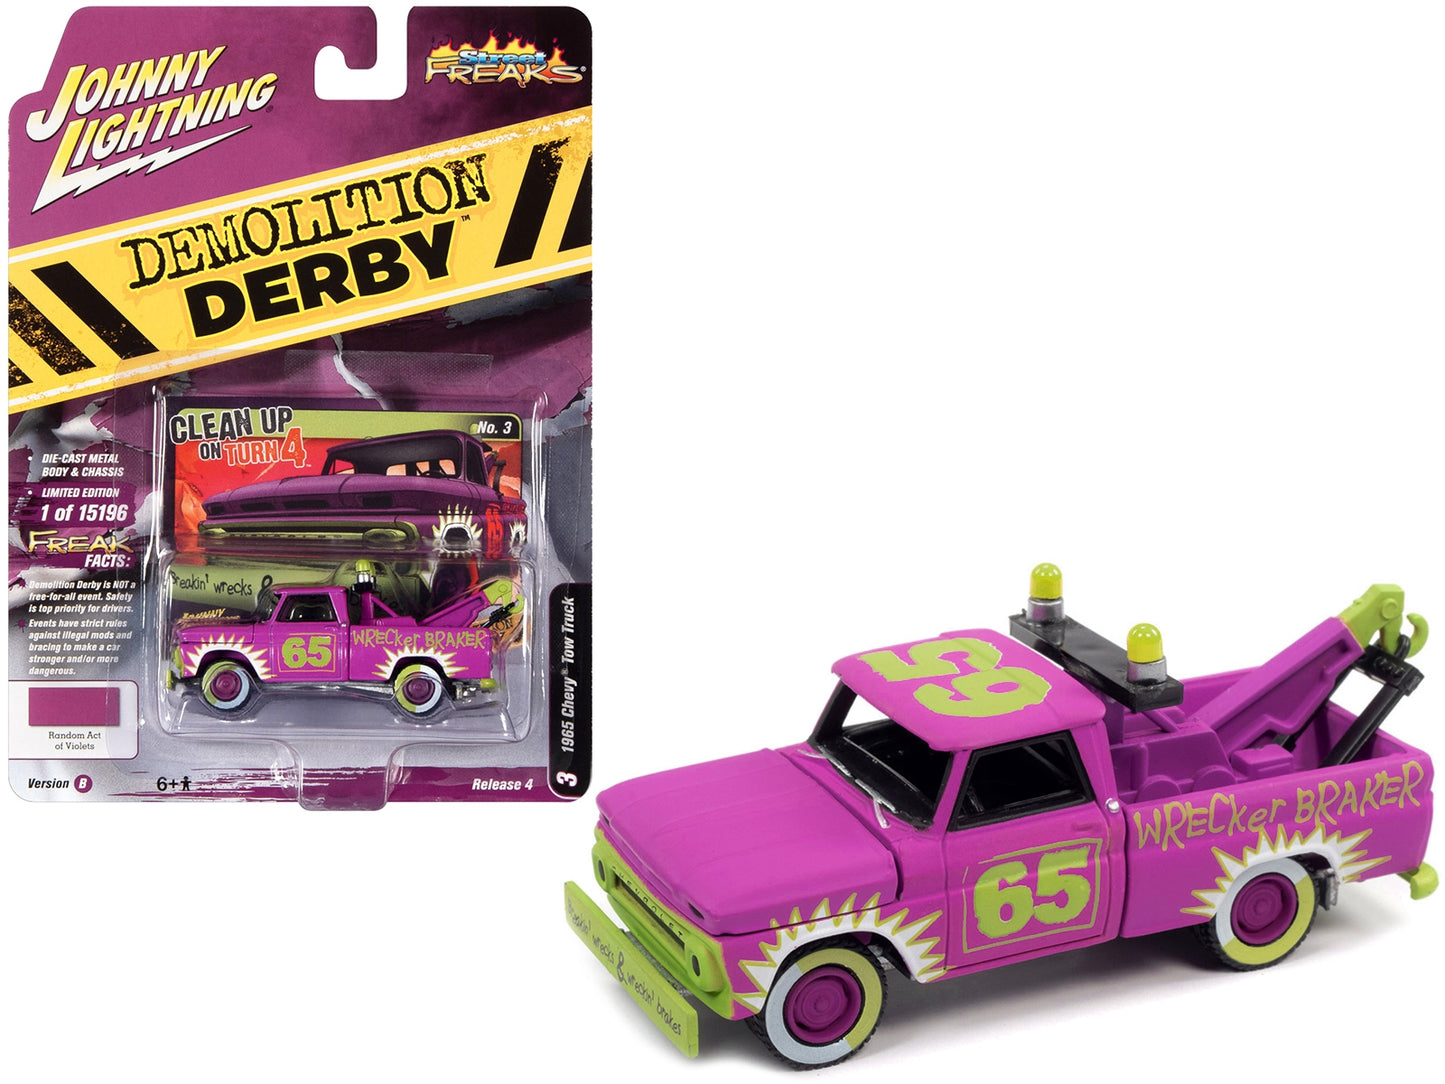 1965 Chevrolet Tow Truck #65 Random Acts of Violets Purple with Graphics "Demolition Derby" "Street Freaks" Series Limited Edition to 15196 pieces Worldwide 1/64 Diecast Model Car by Johnny Lightning